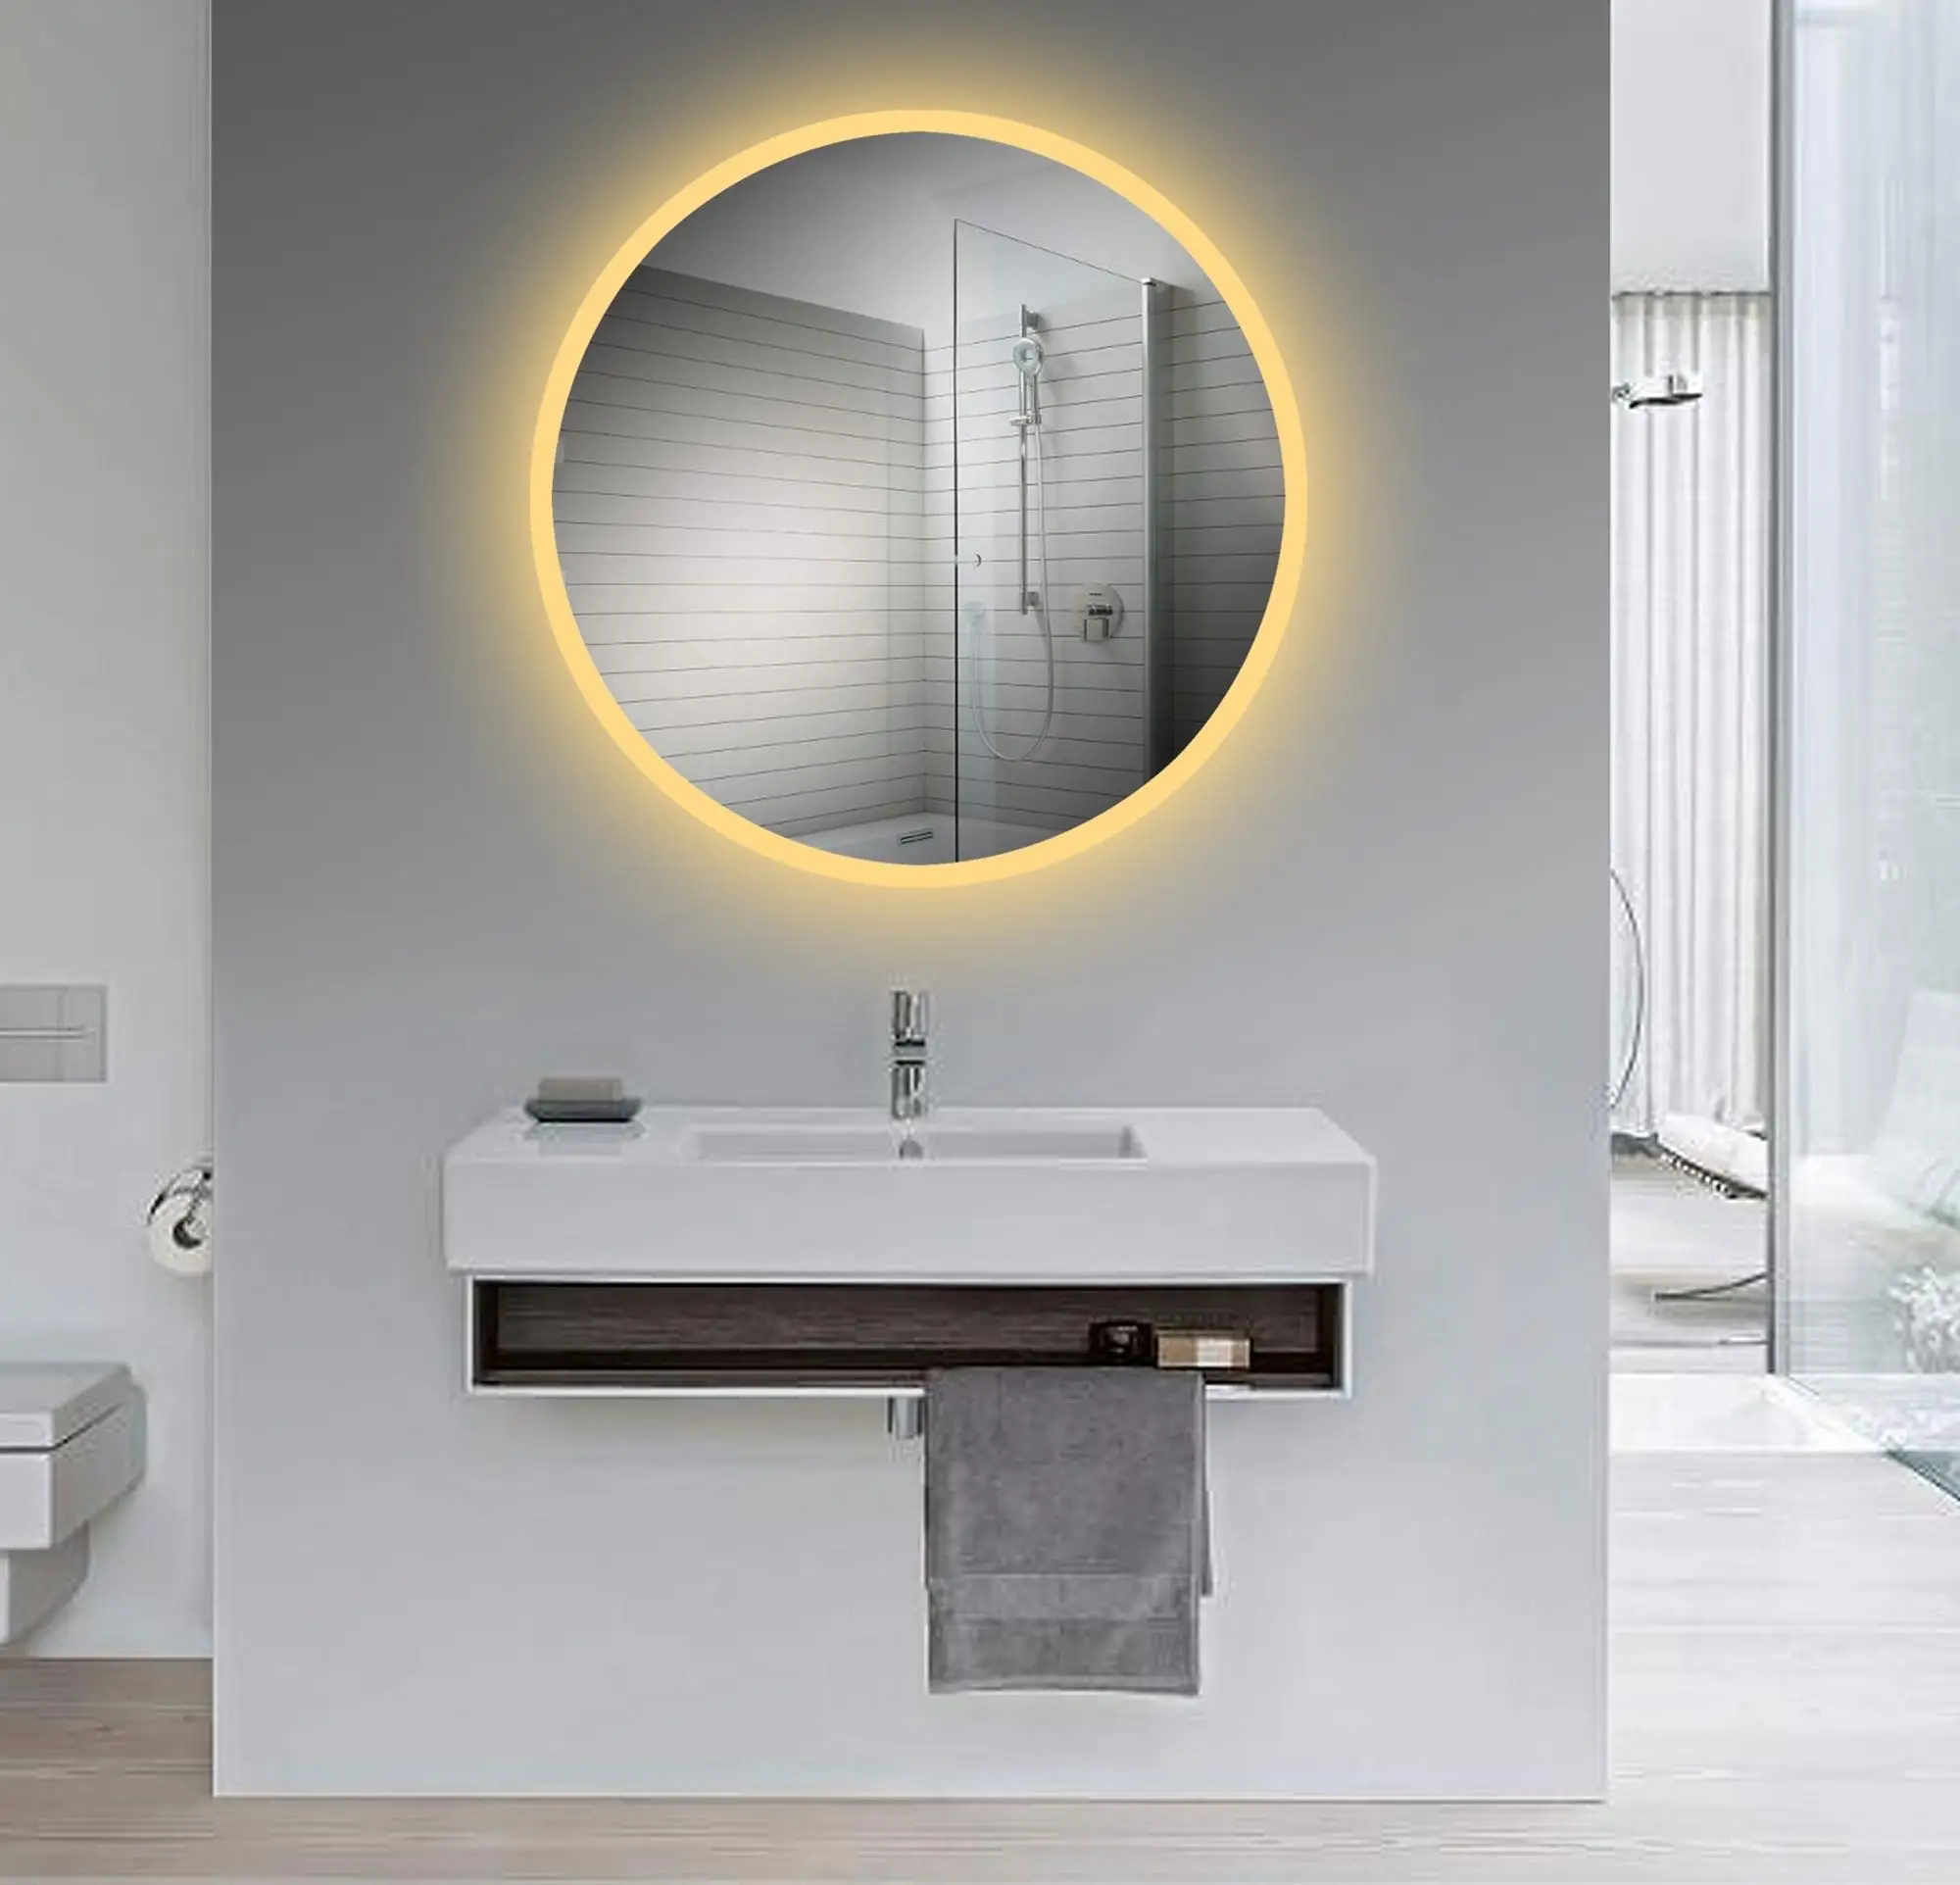 Contemporary Warm Lighting Led Round Mirror For Hotel Bathroom ...